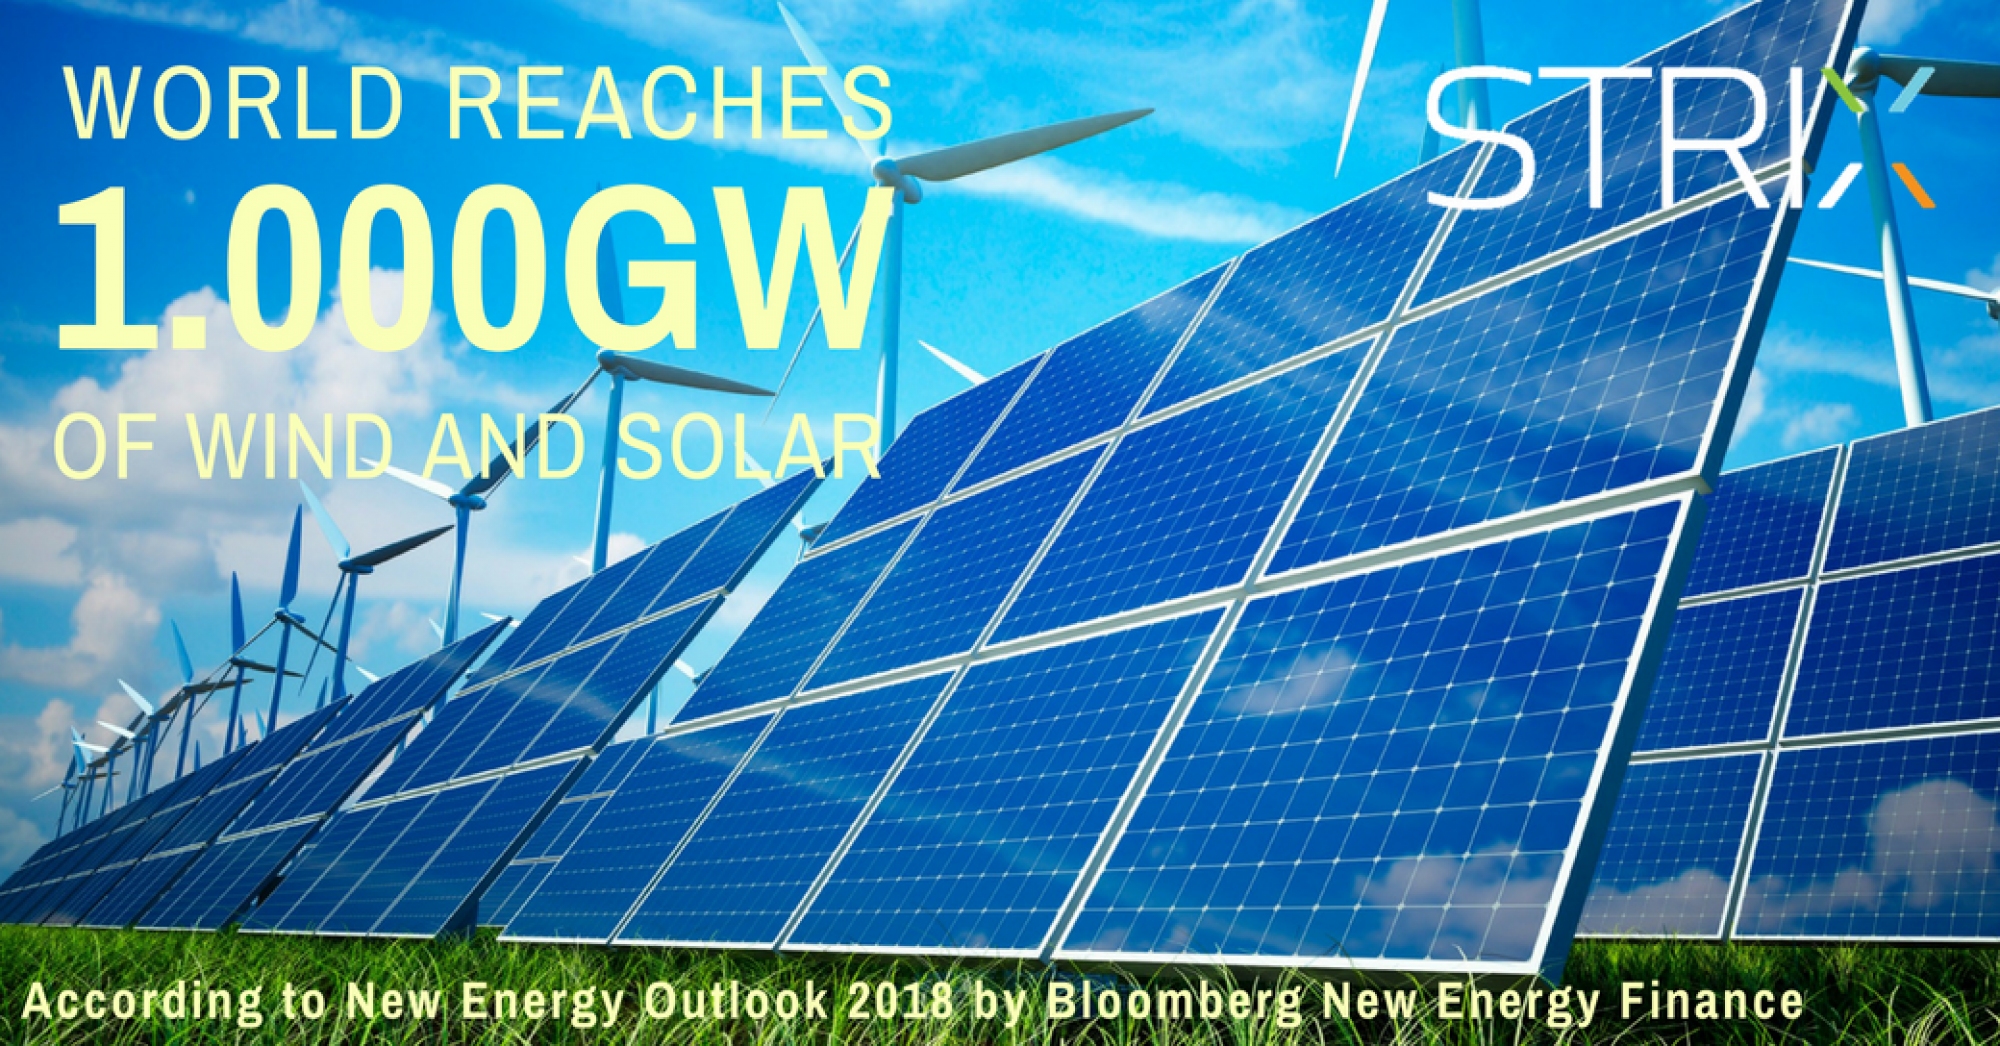 The world has installed 1.000GW of wind and solar power